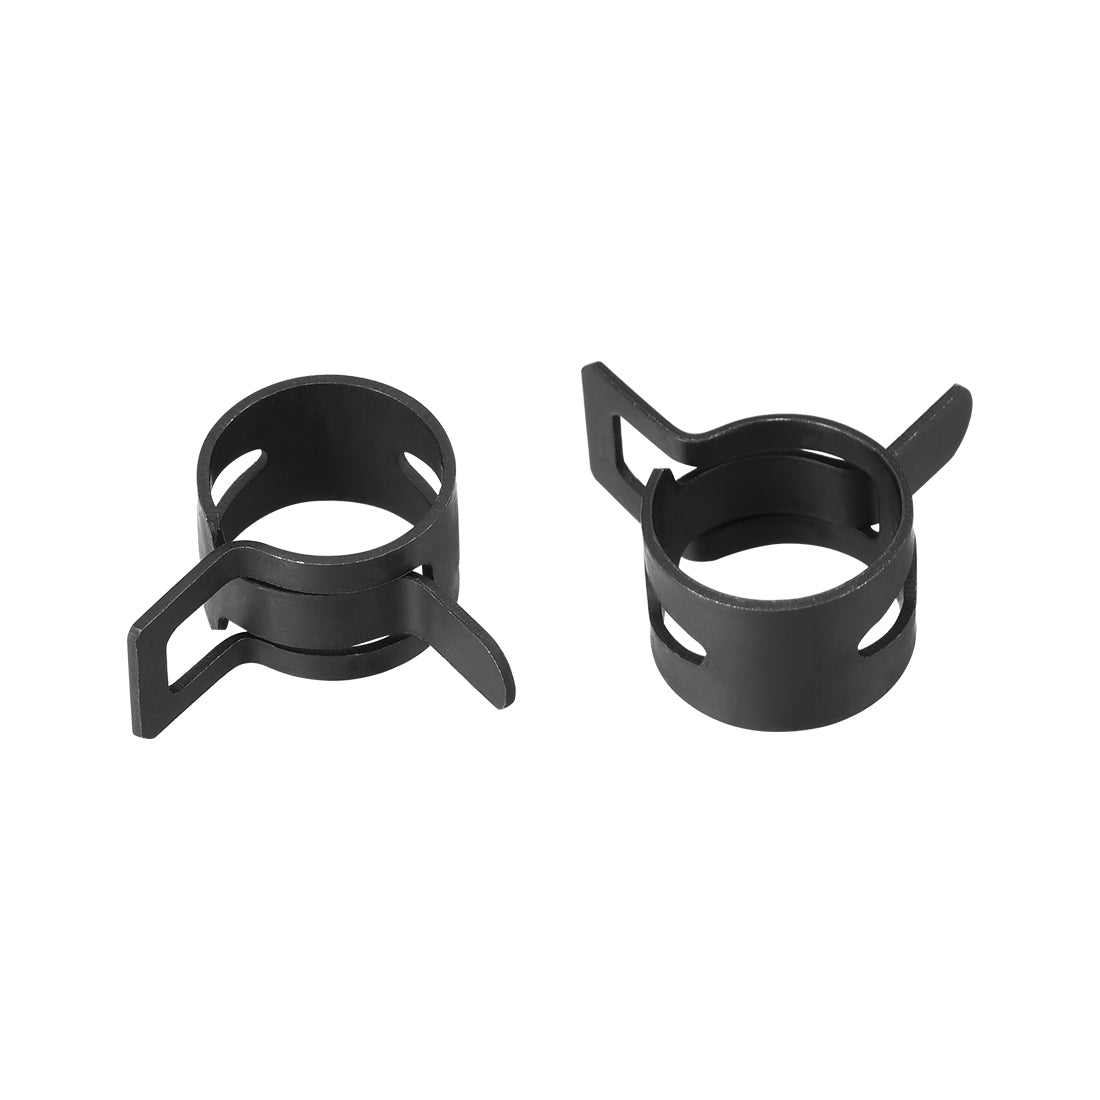 Uxcell Uxcell Steel Band Clamp 18mm for Fuel Line Silicone Hose Tube Spring Clips Clamp Black Manganese Steel 20Pcs